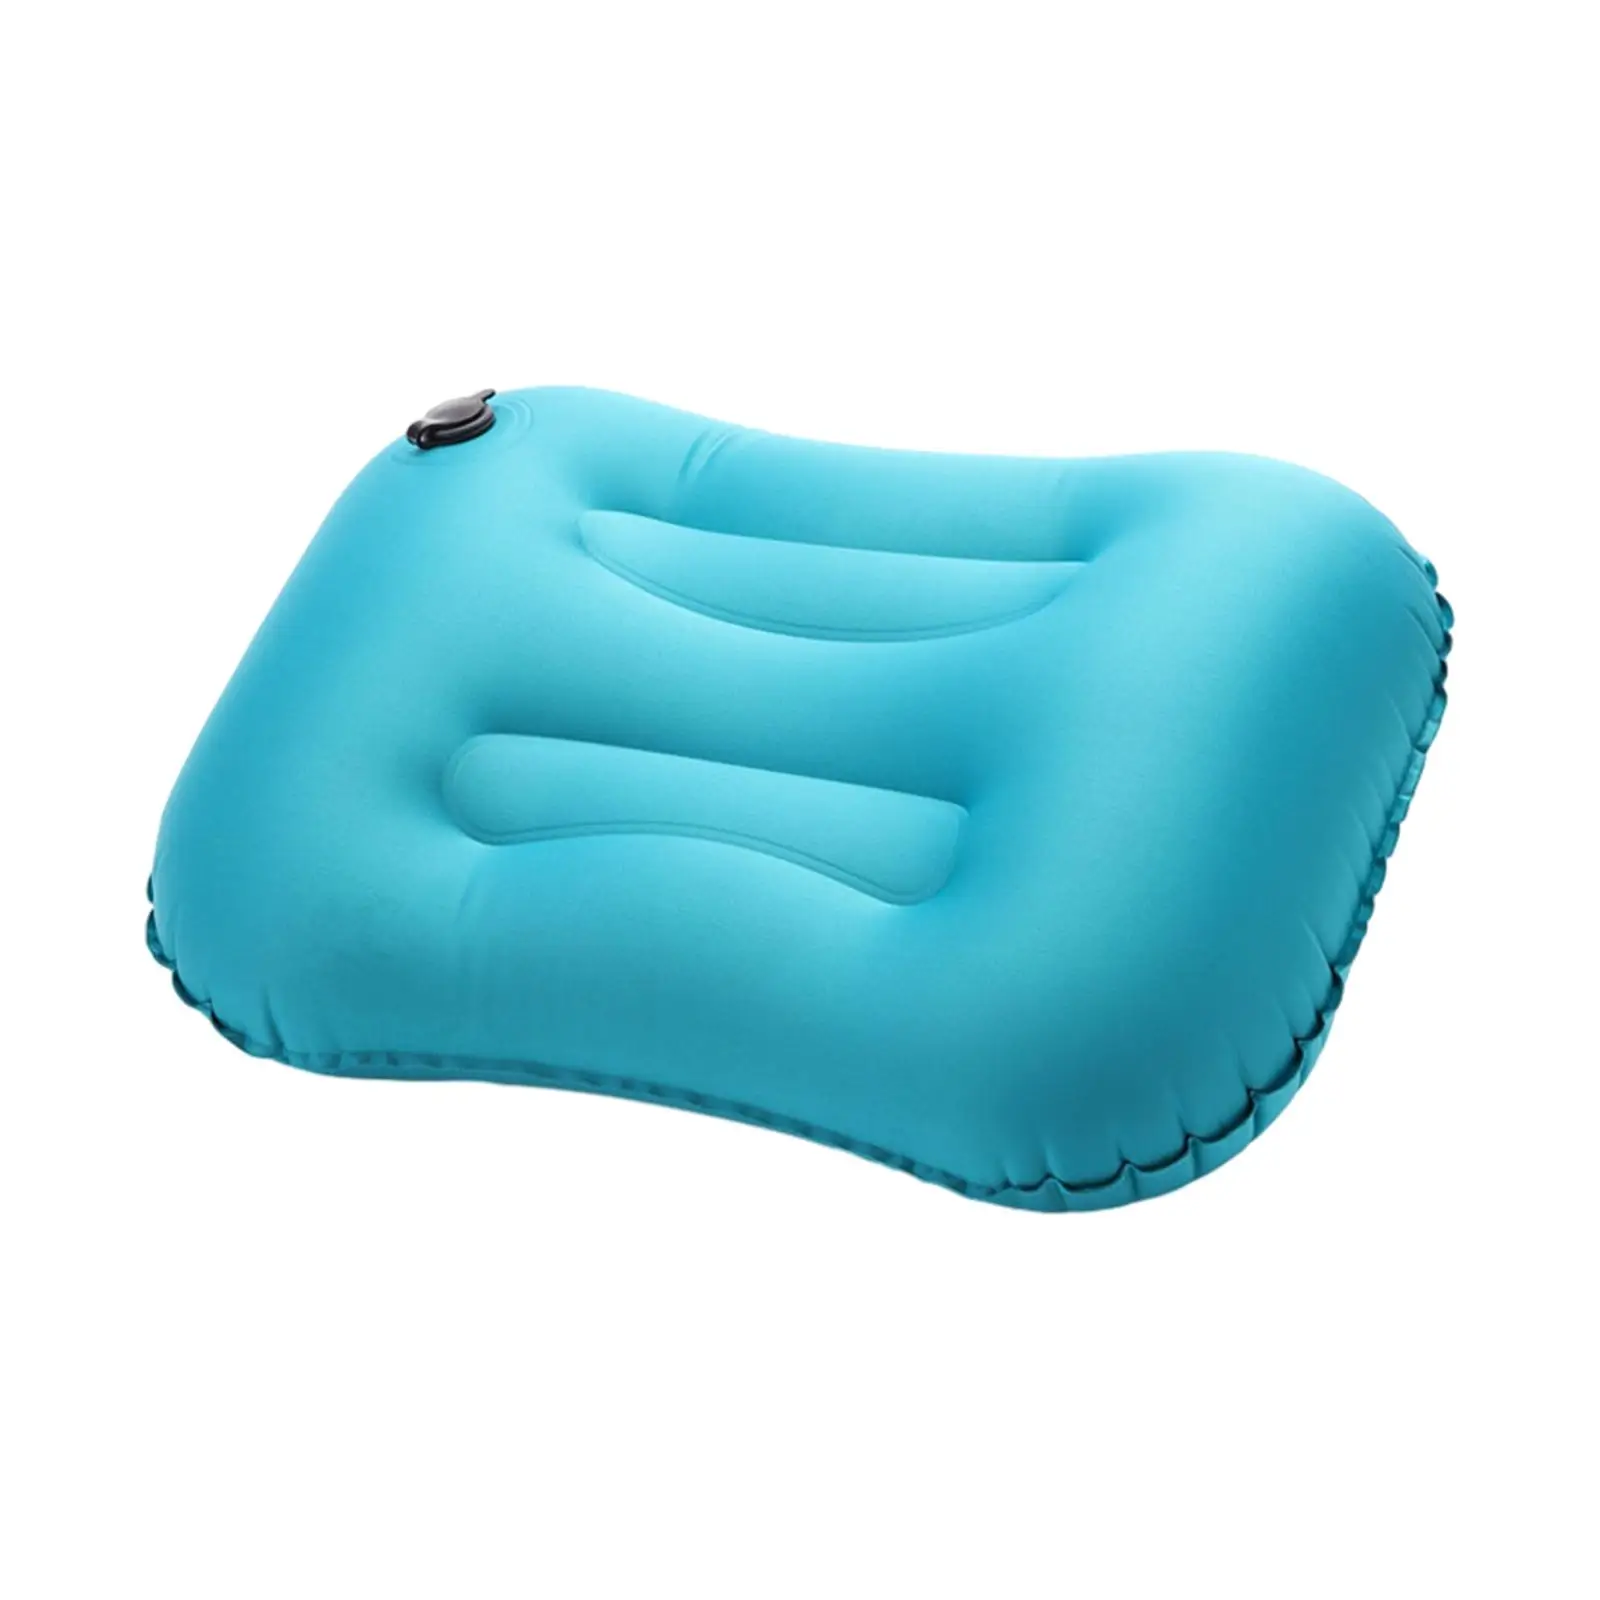 Camping Inflatable Pillow Sleeping Pillow Portable Lightweight Compressible Pillow for Nap Rest Outdoor Hammock Beach Hiking